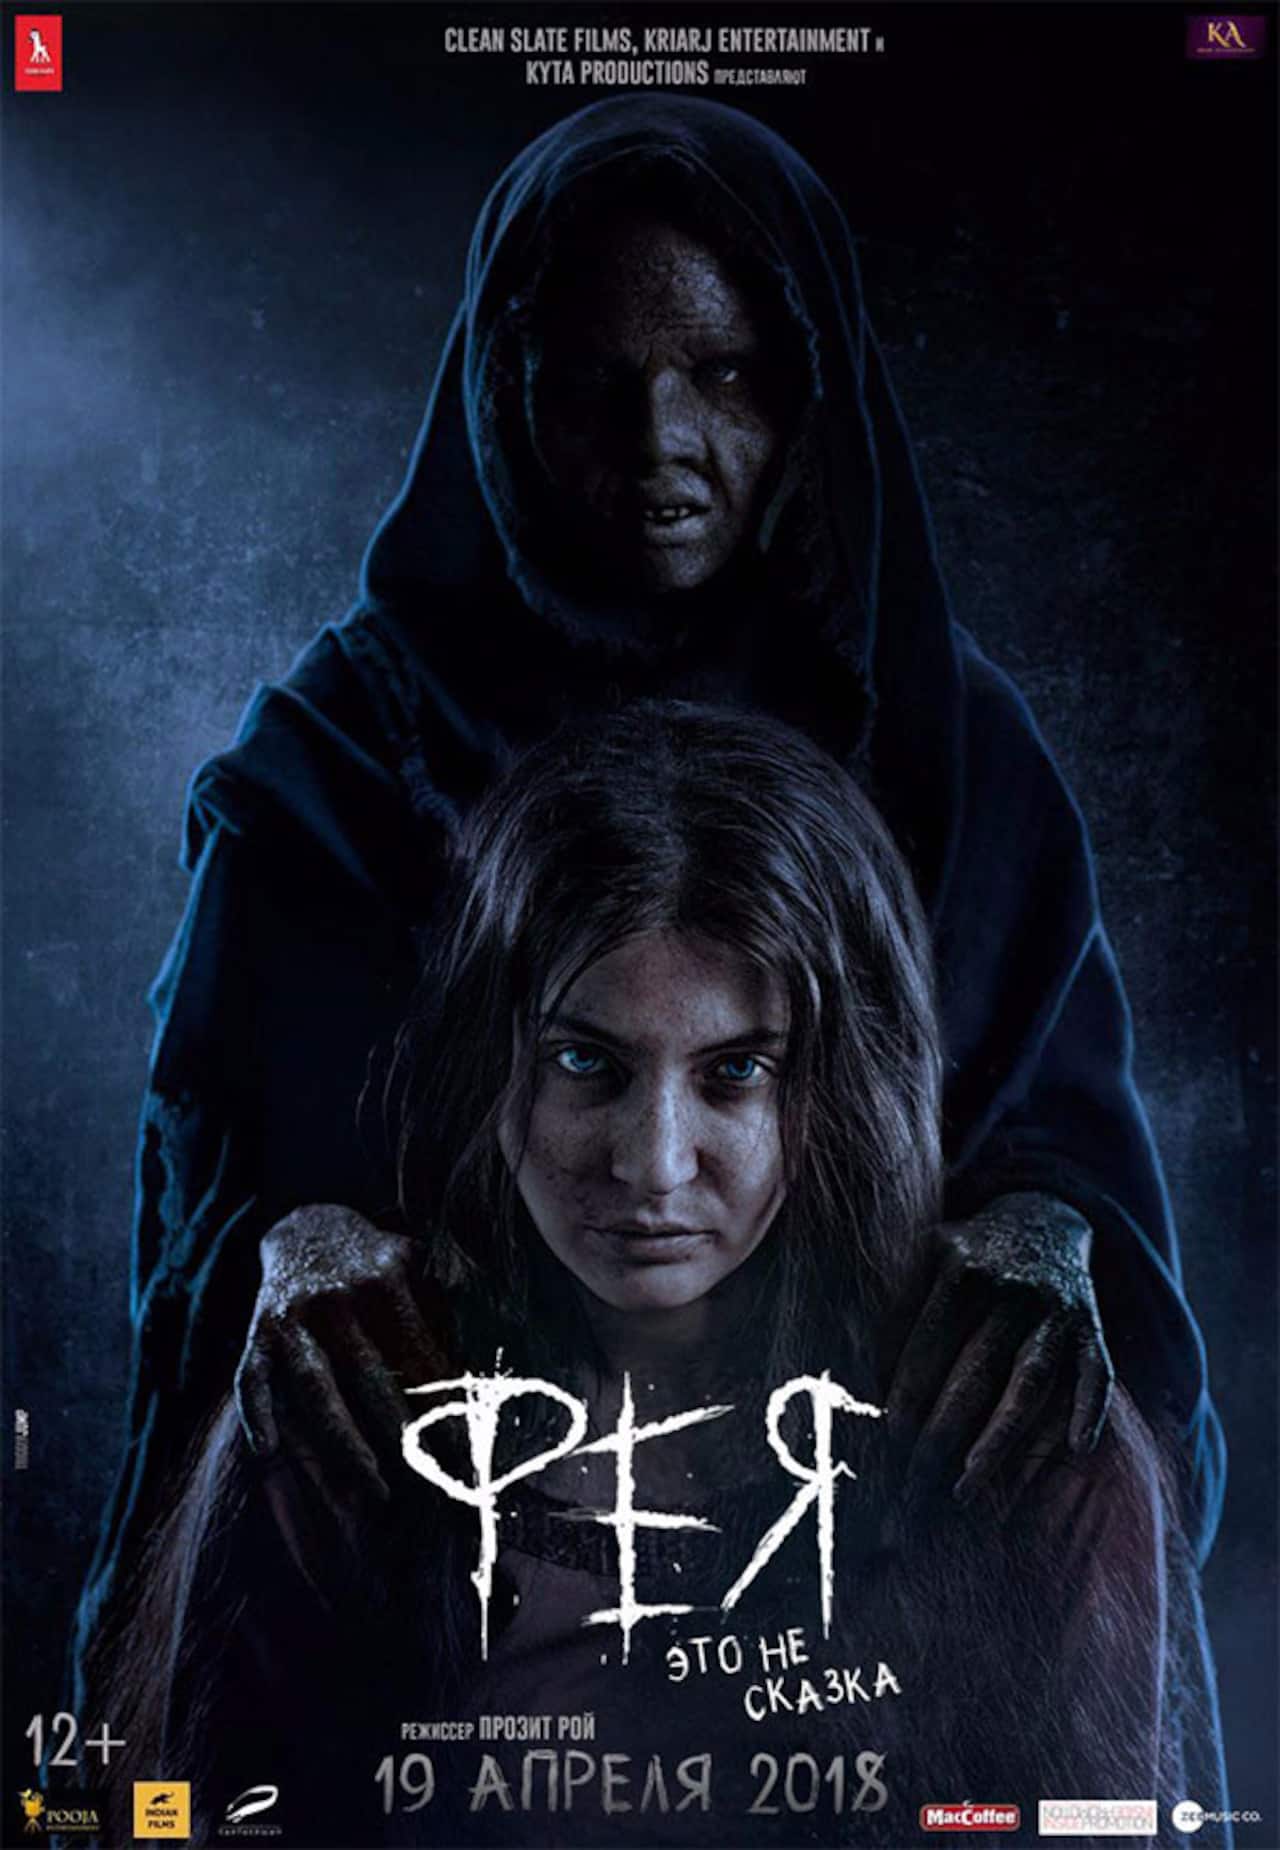 Anushka Sharma's Pari to release in Russia on April 19 - check out the poster